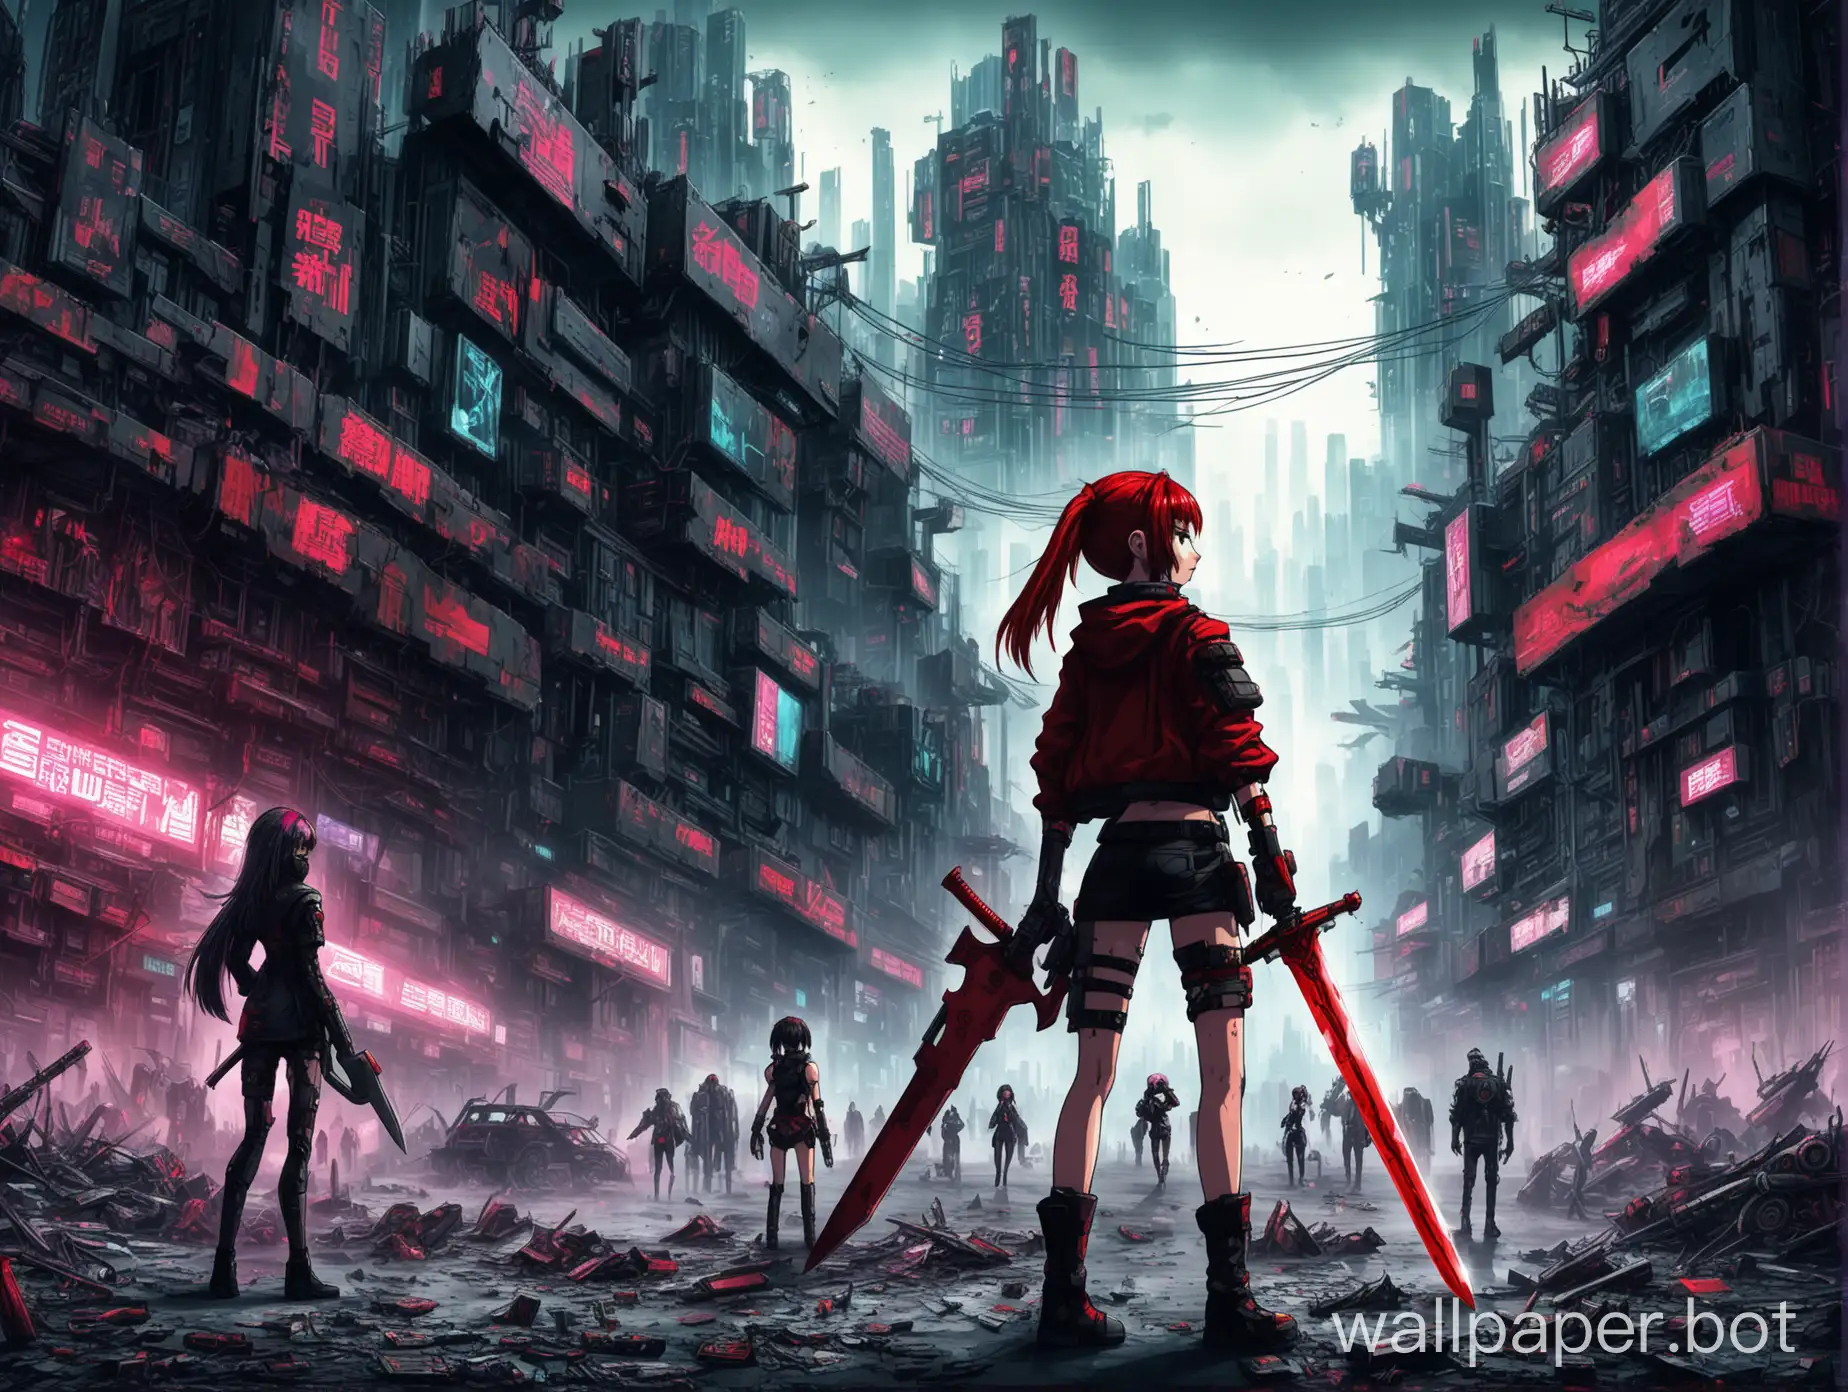 anime cyberpunk apocalypse world, a girl far in the background with red sword